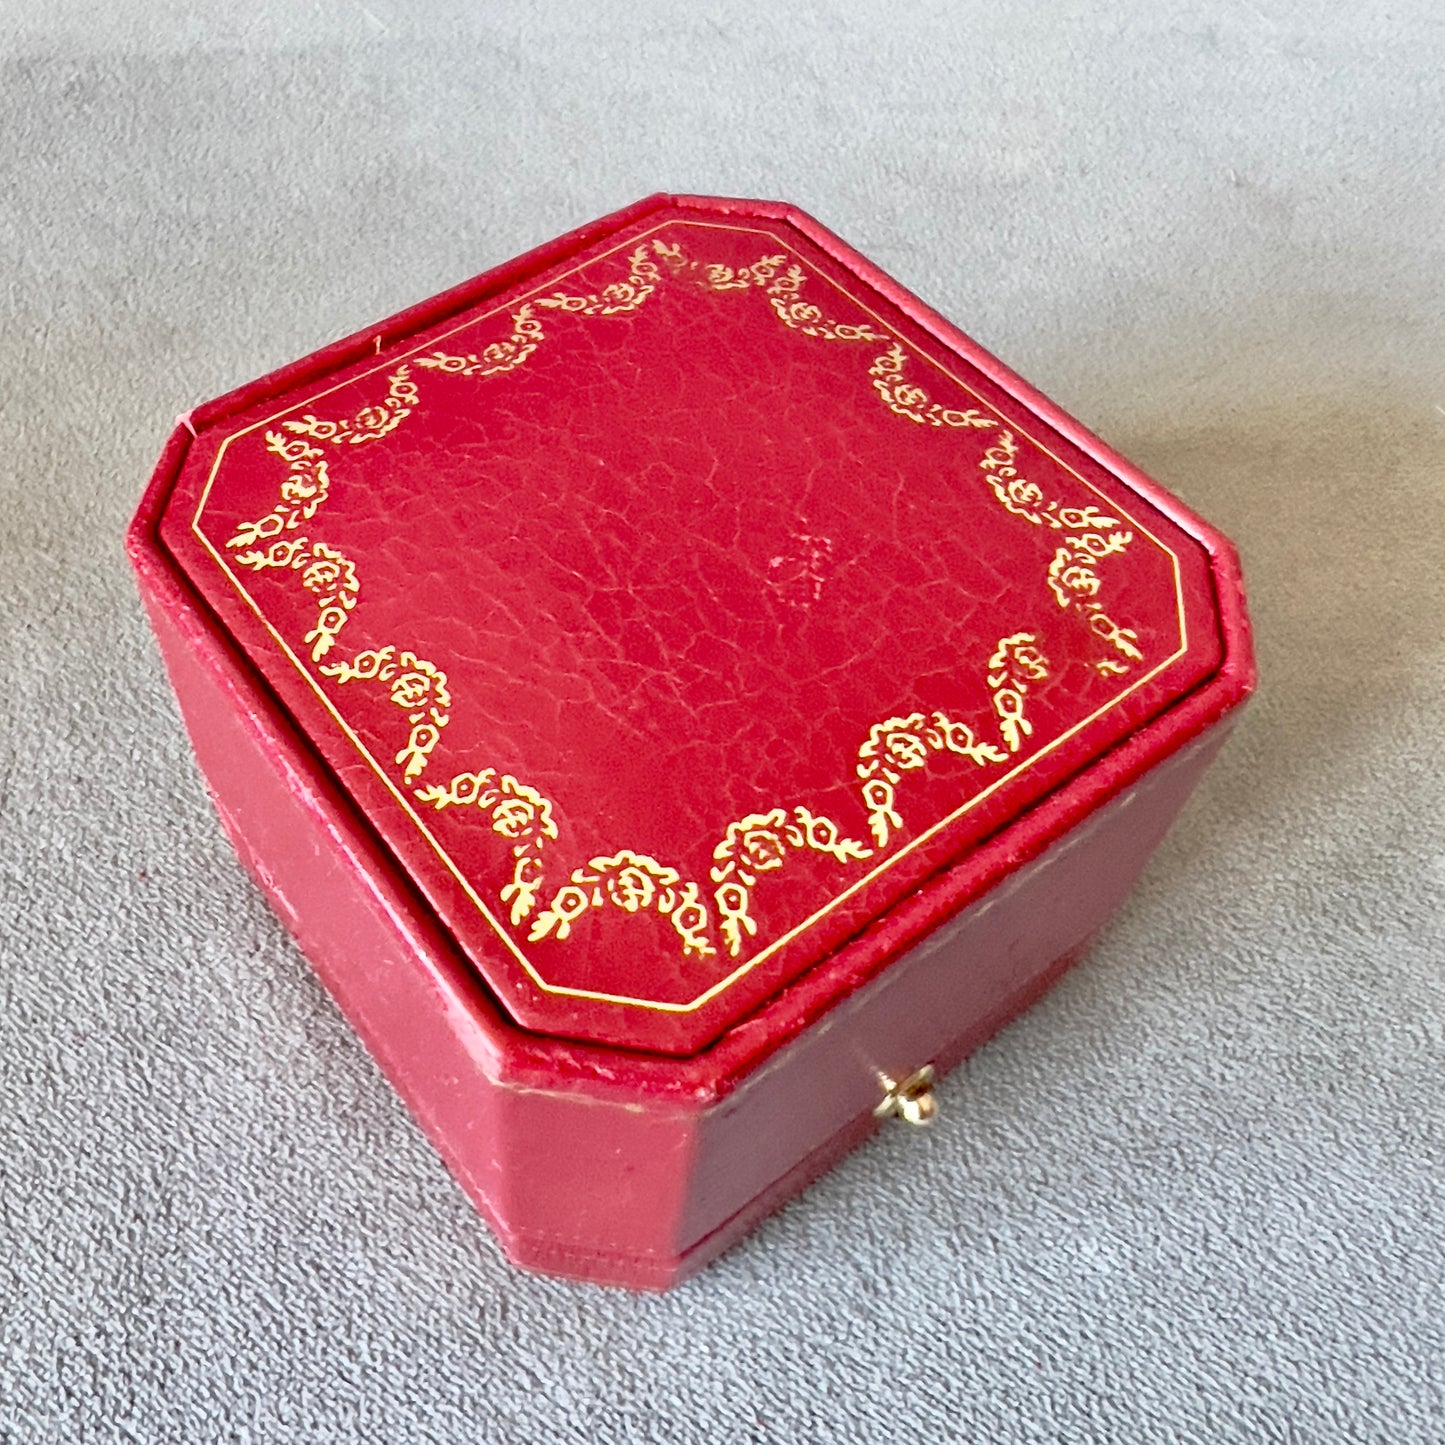 CARTIER Ring Box + Outer Box 3.10x3x2.30 inches